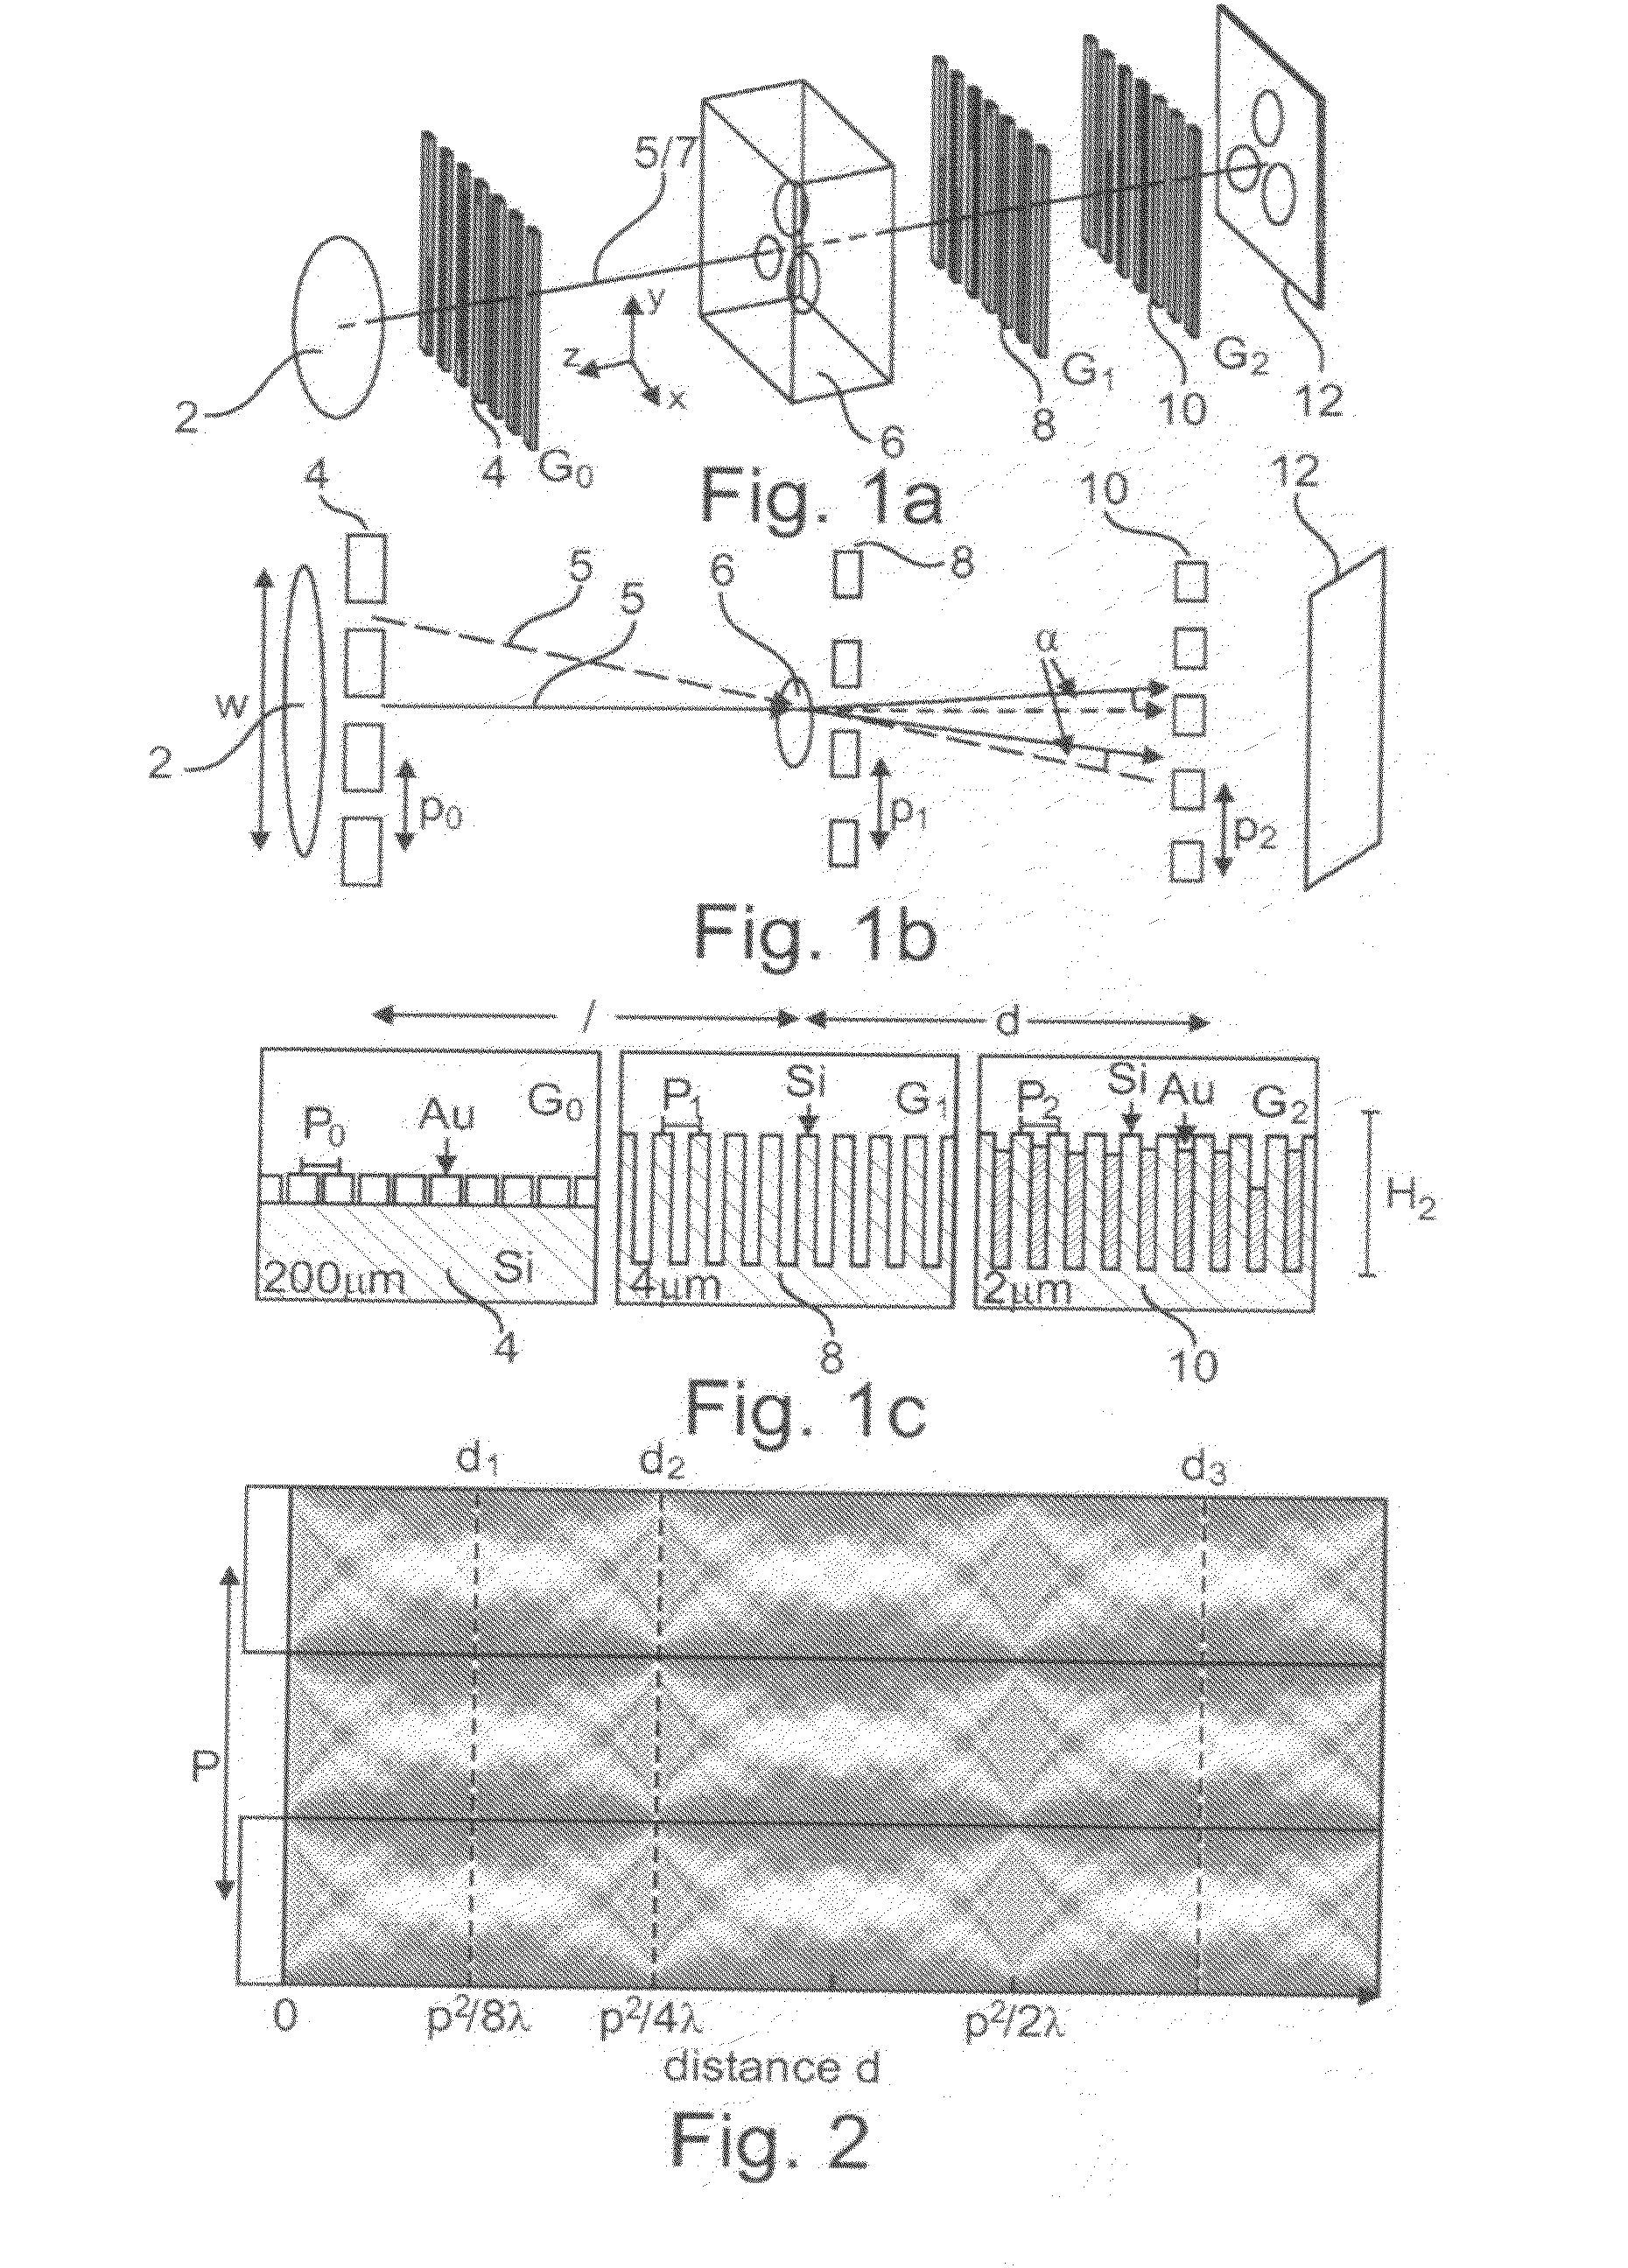 Apparatus for phase-contrast imaging comprising a displaceable x-ray detector element and method